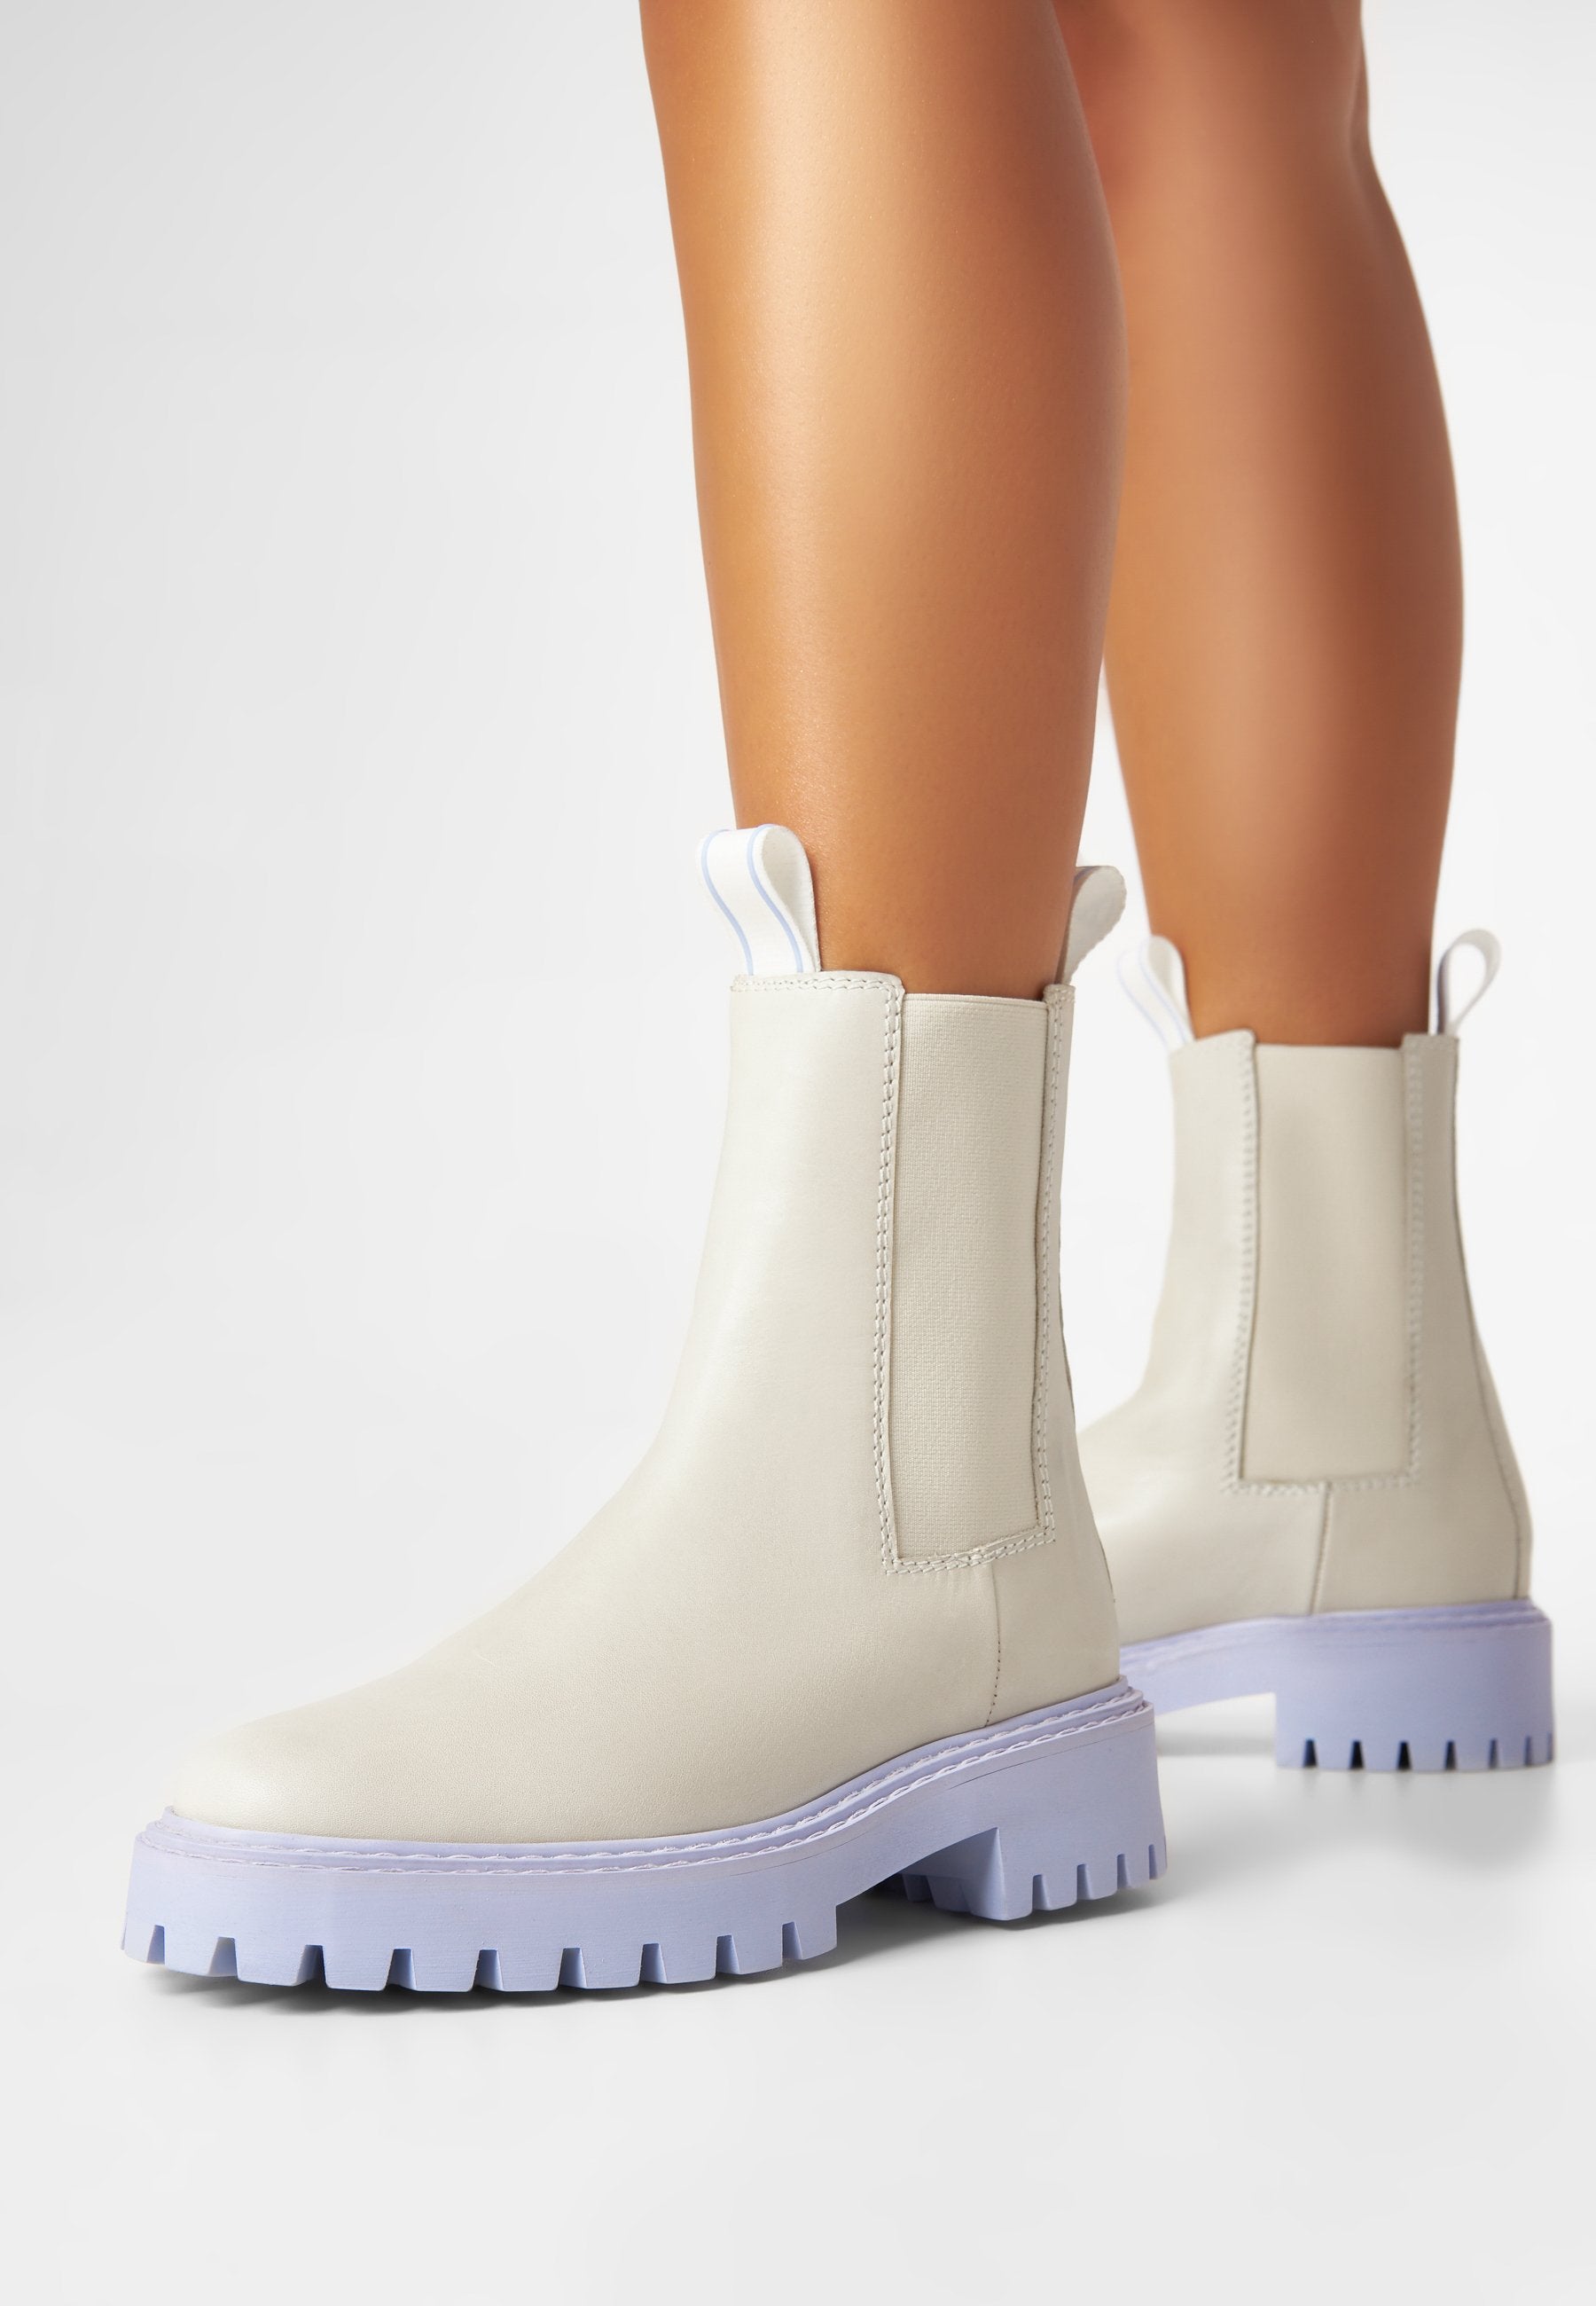 Daze Off White Leather Chelsea Boots LAST1502 - 9